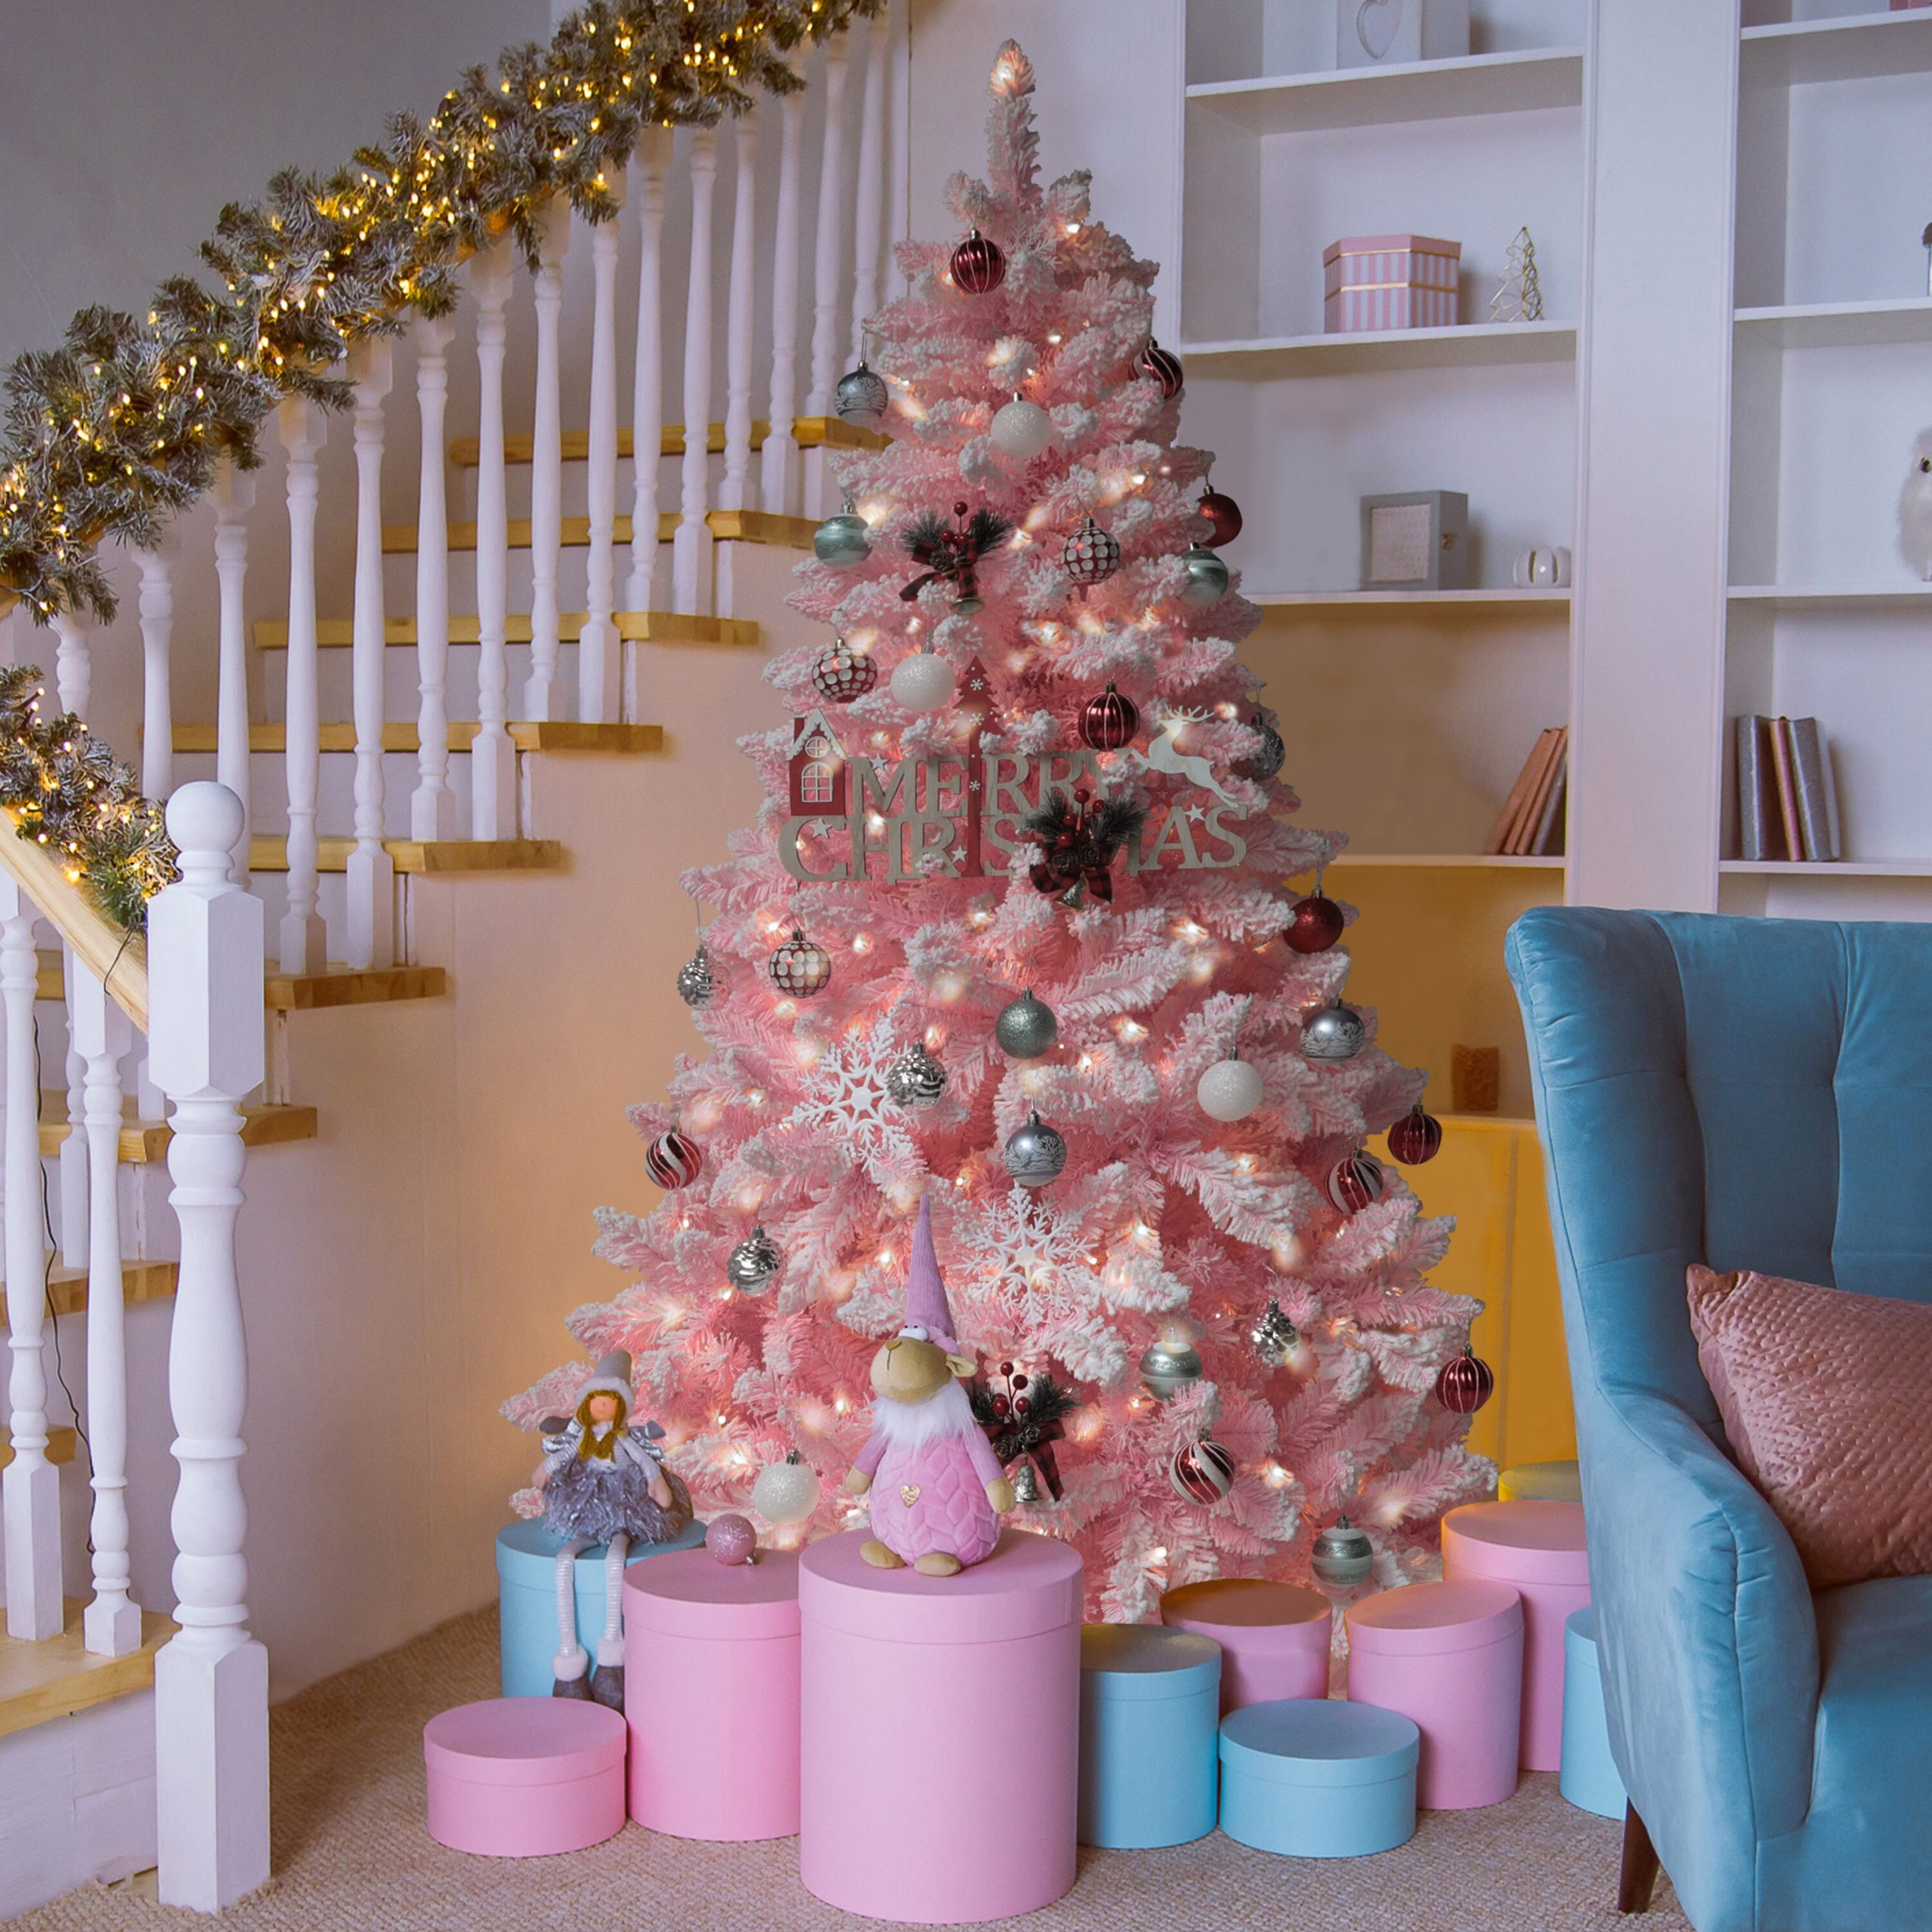 Feel Cozy and Chic this Winter with Pink Christmas Tree Fashion: 10 Clothing Picks